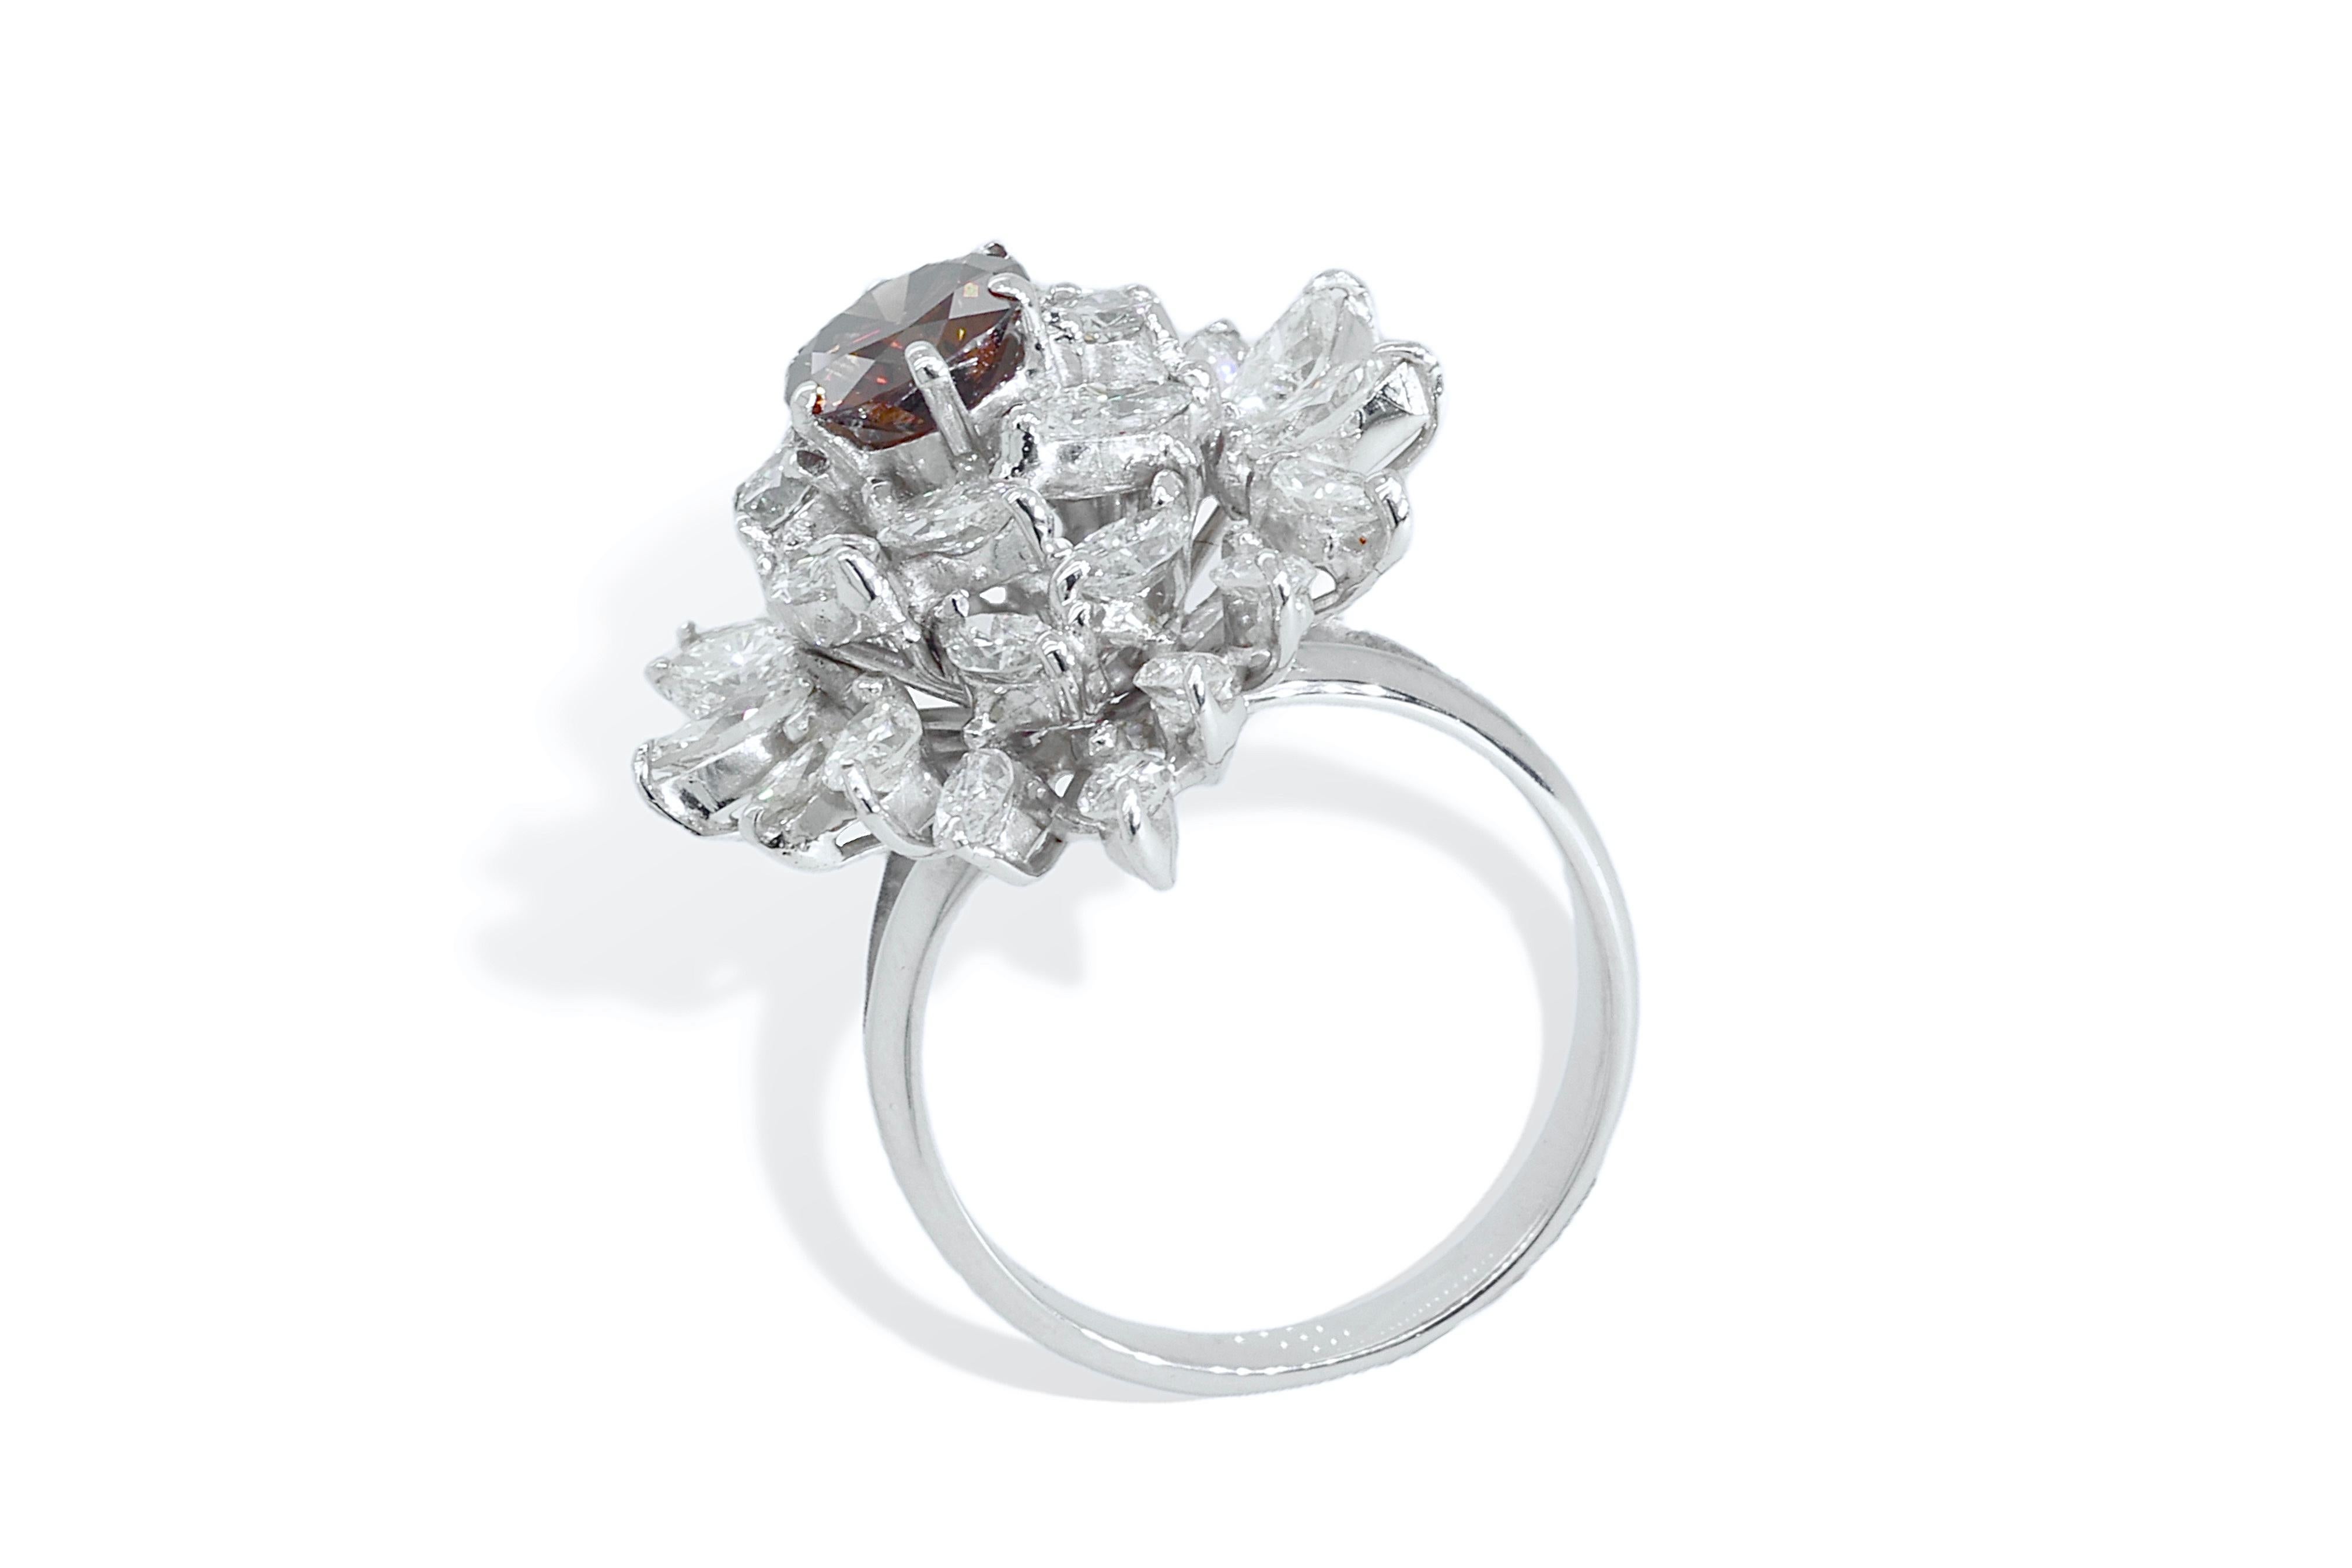 18kt White Gold Ring with 1.4ct Brown Diamond, Marquise & Brilliant Cut Diamonds For Sale 2